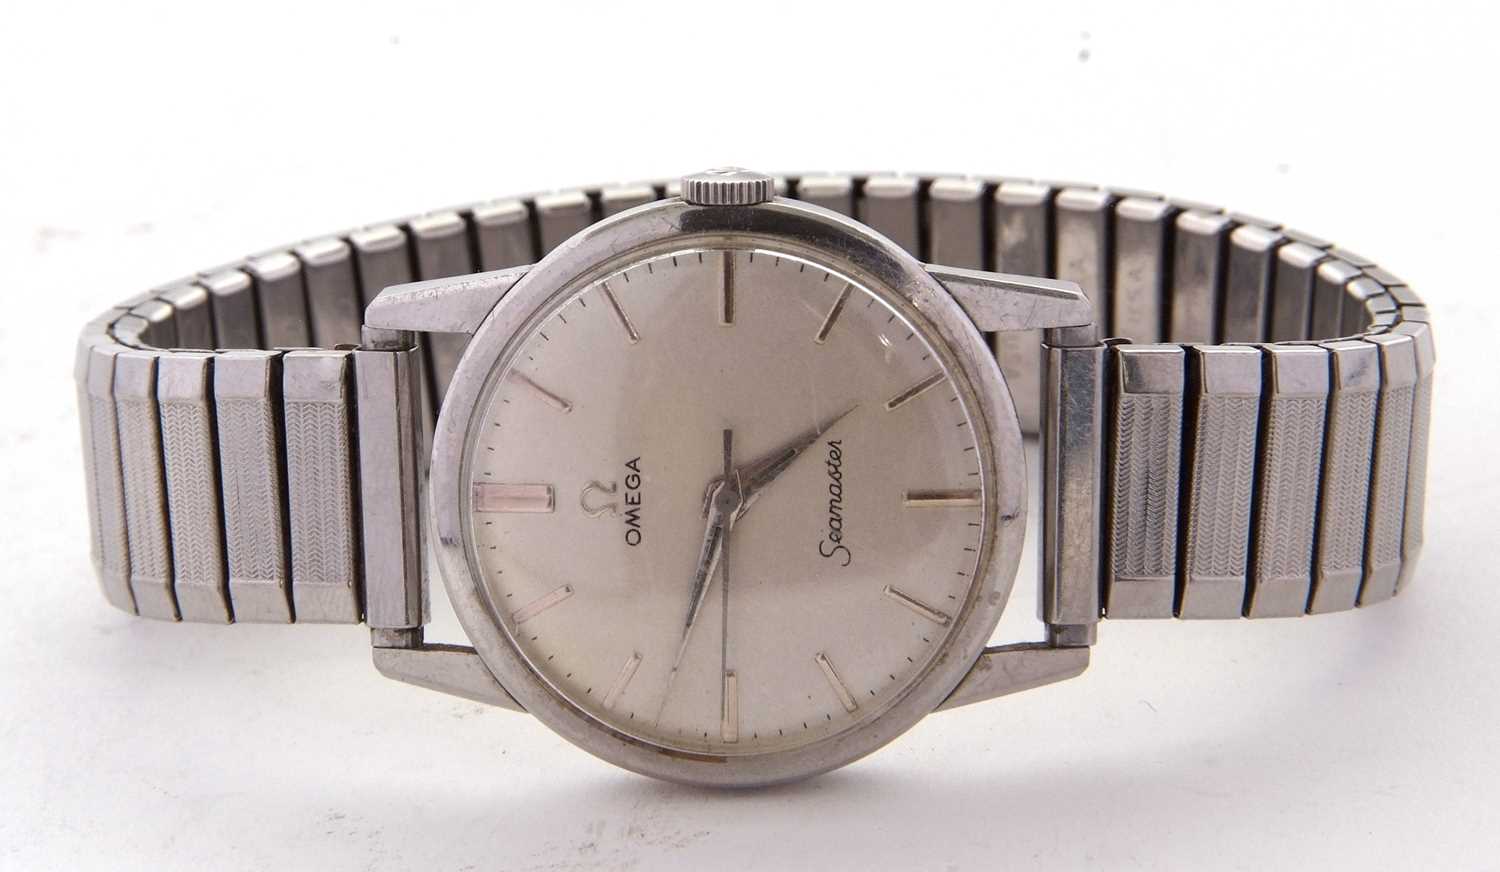 A gents stainless steel Omega Seamaster, the watch has a manually crown wound movement, an Omega